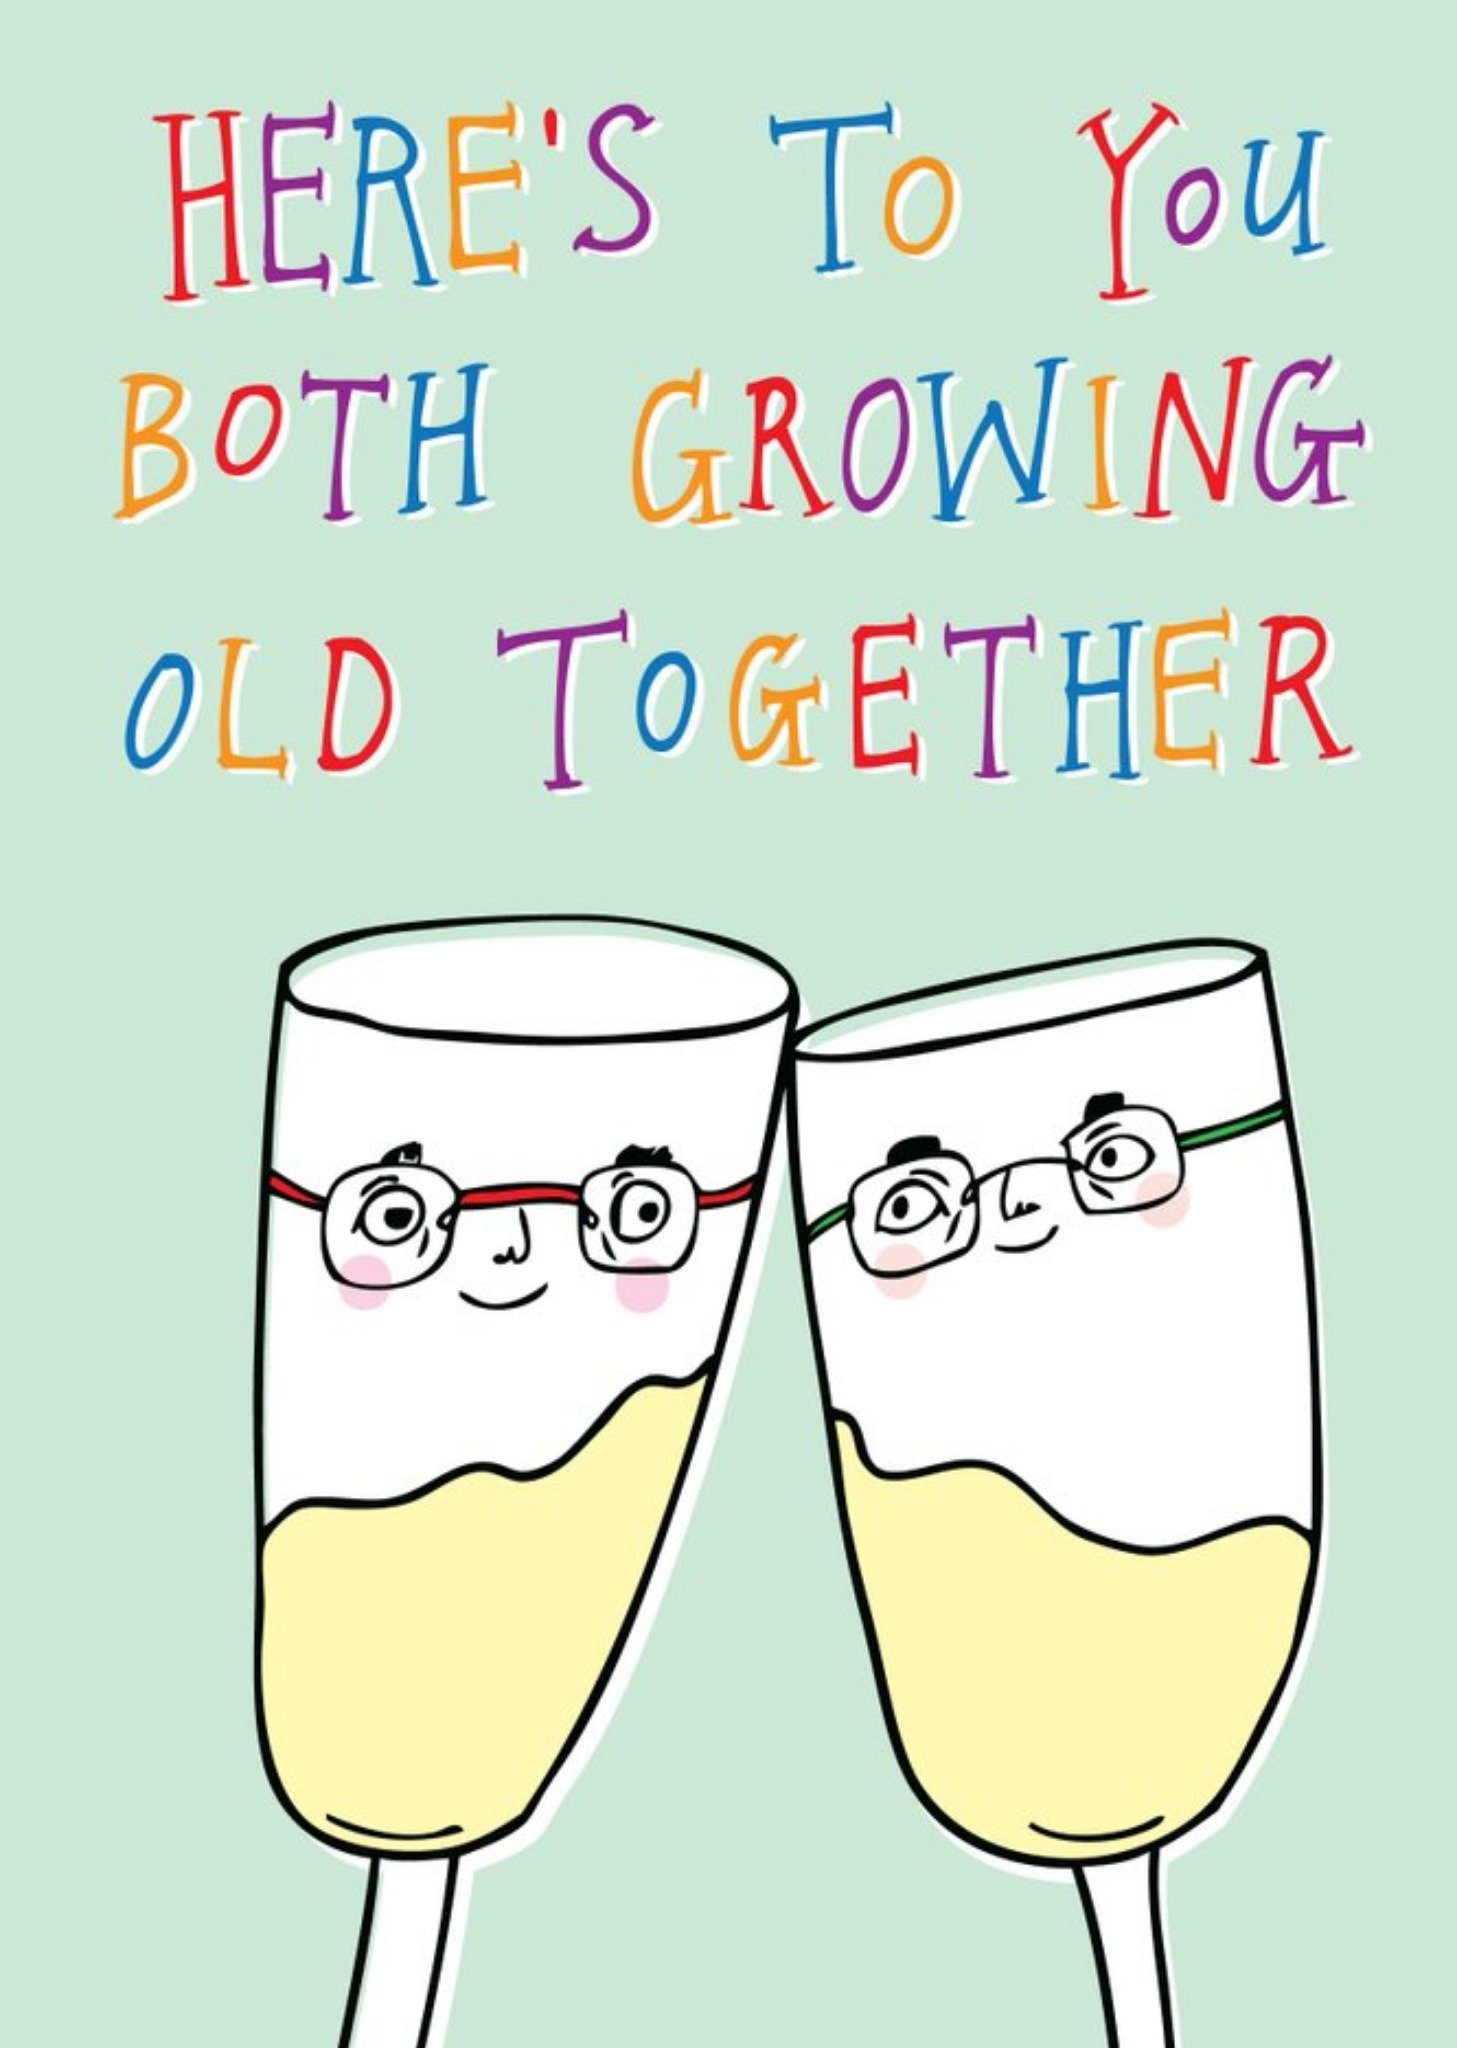 Moonpig Illustration Of A Pair Of Wine Glass Characters Here's To You Both Growing Old Together Wedd